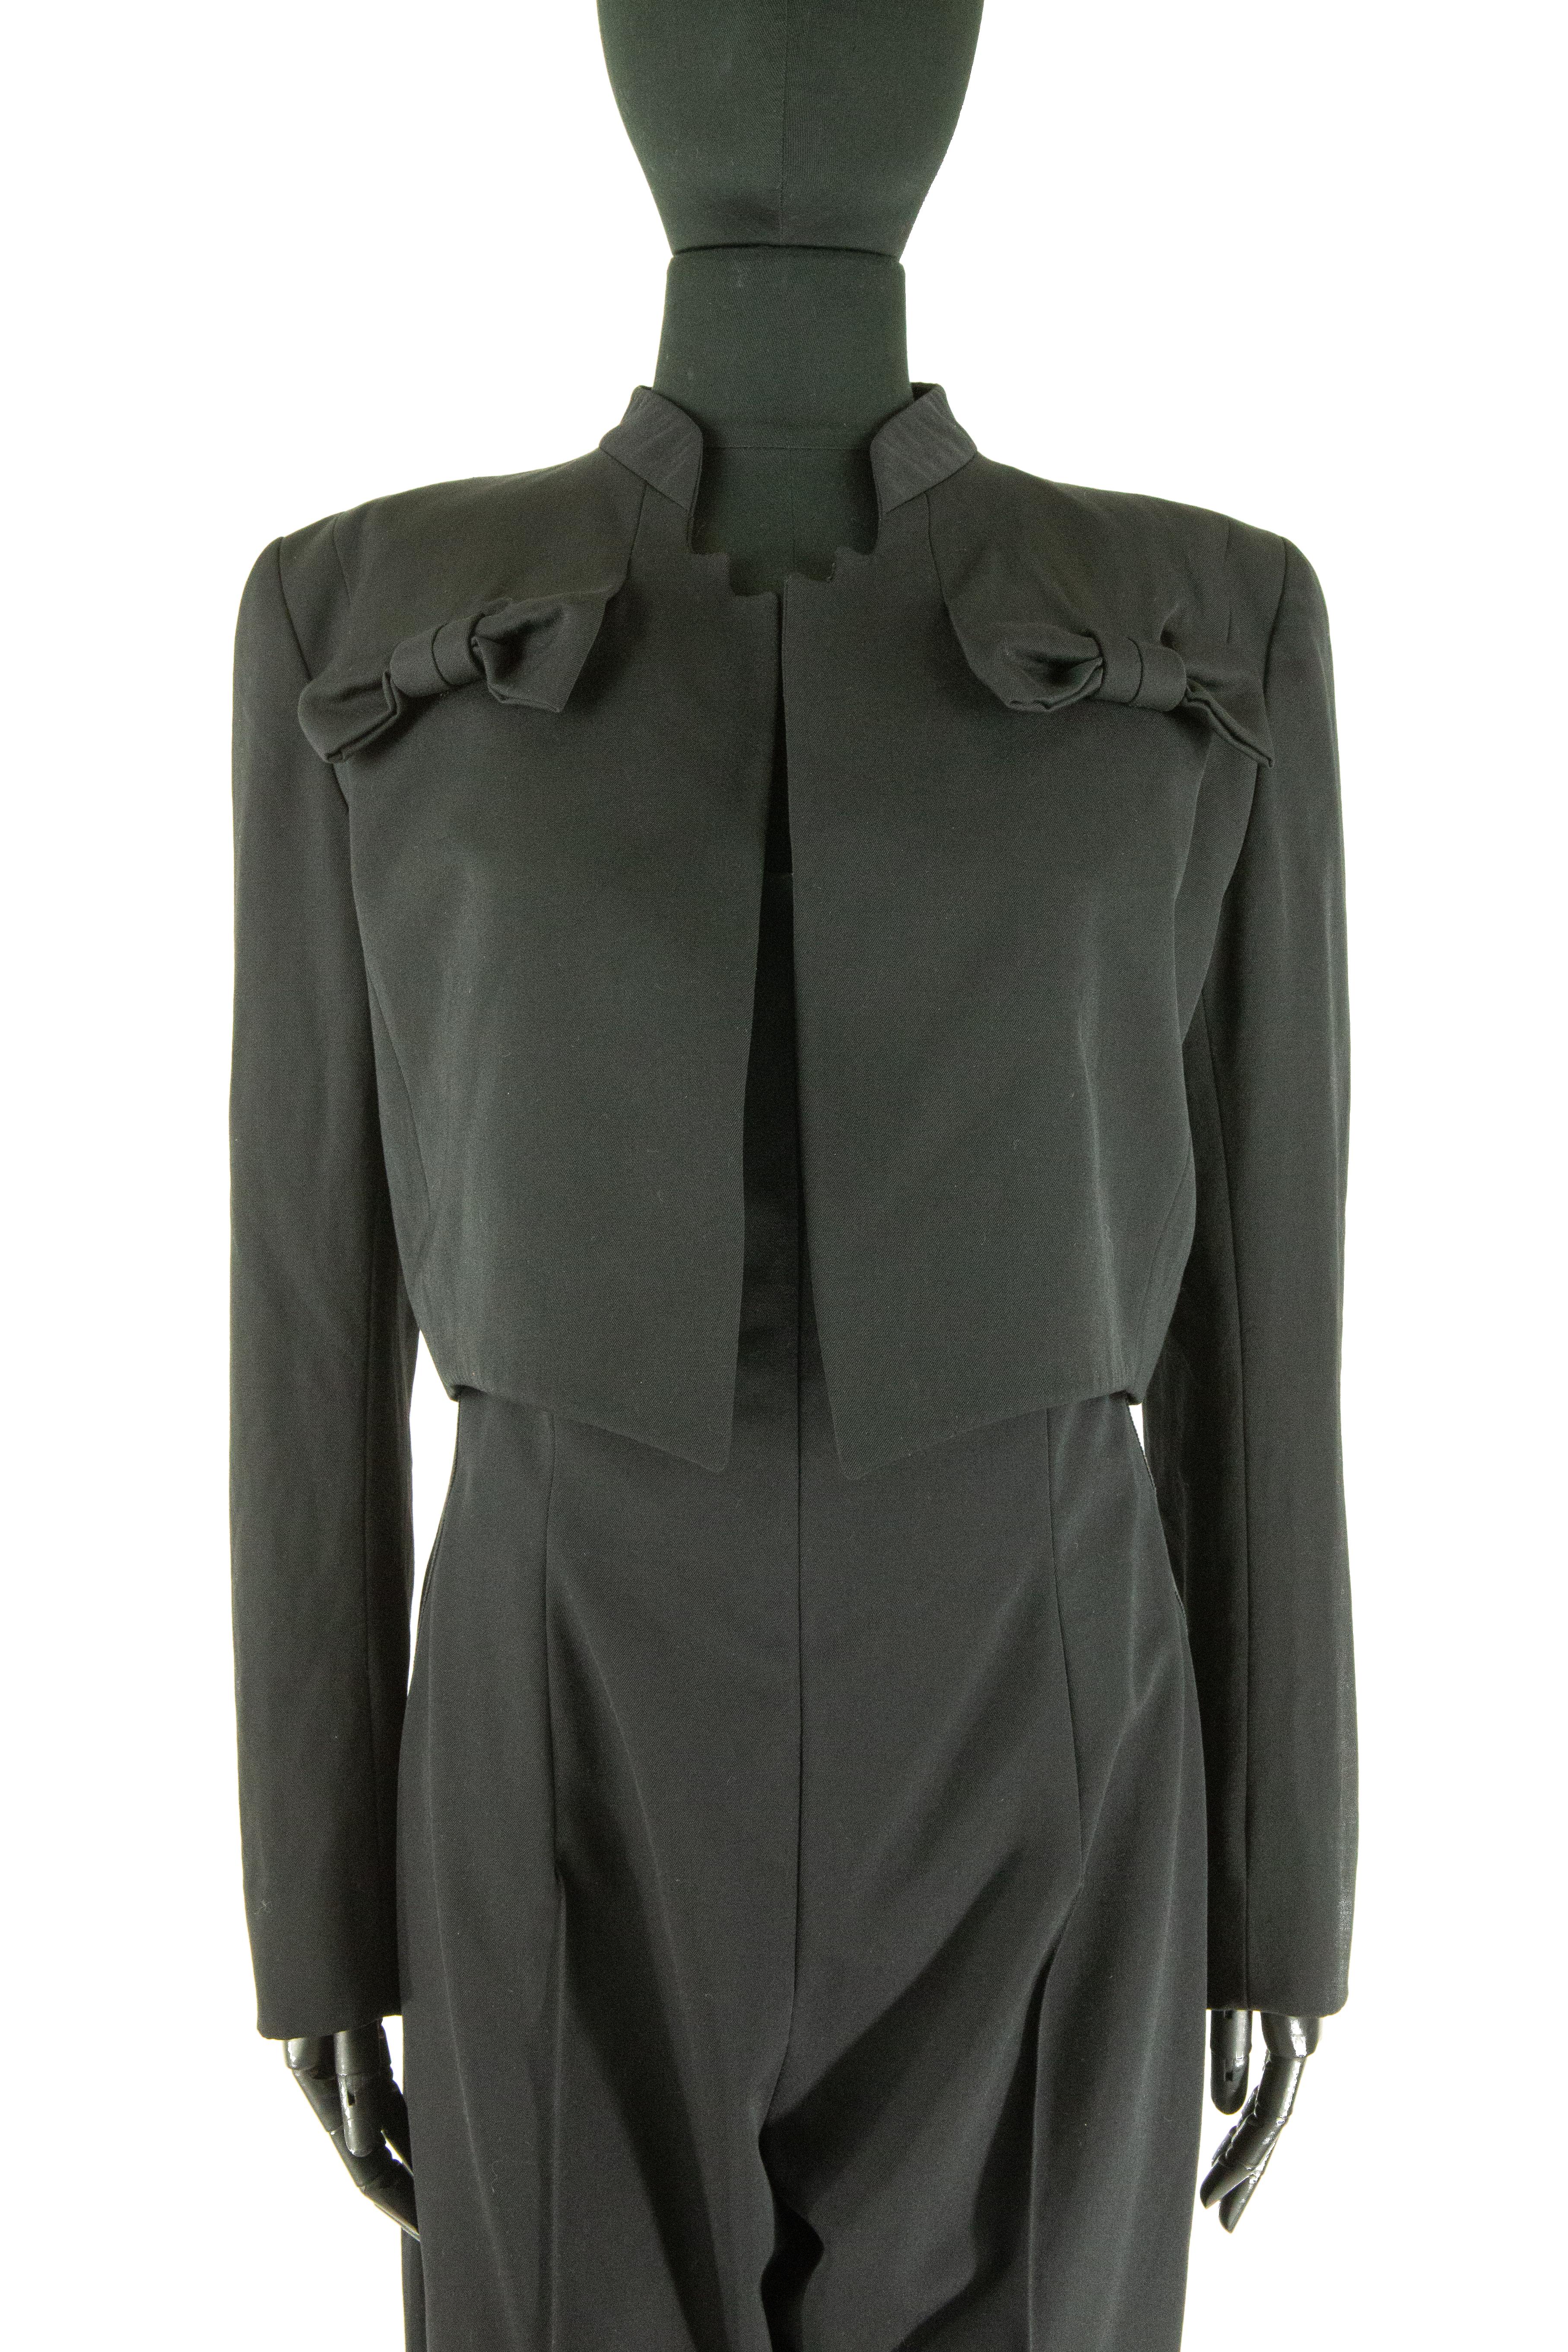 John Galliano For Givenchy Couture A/W 96 Jacket And Jumpsuit In Good Condition For Sale In London, GB